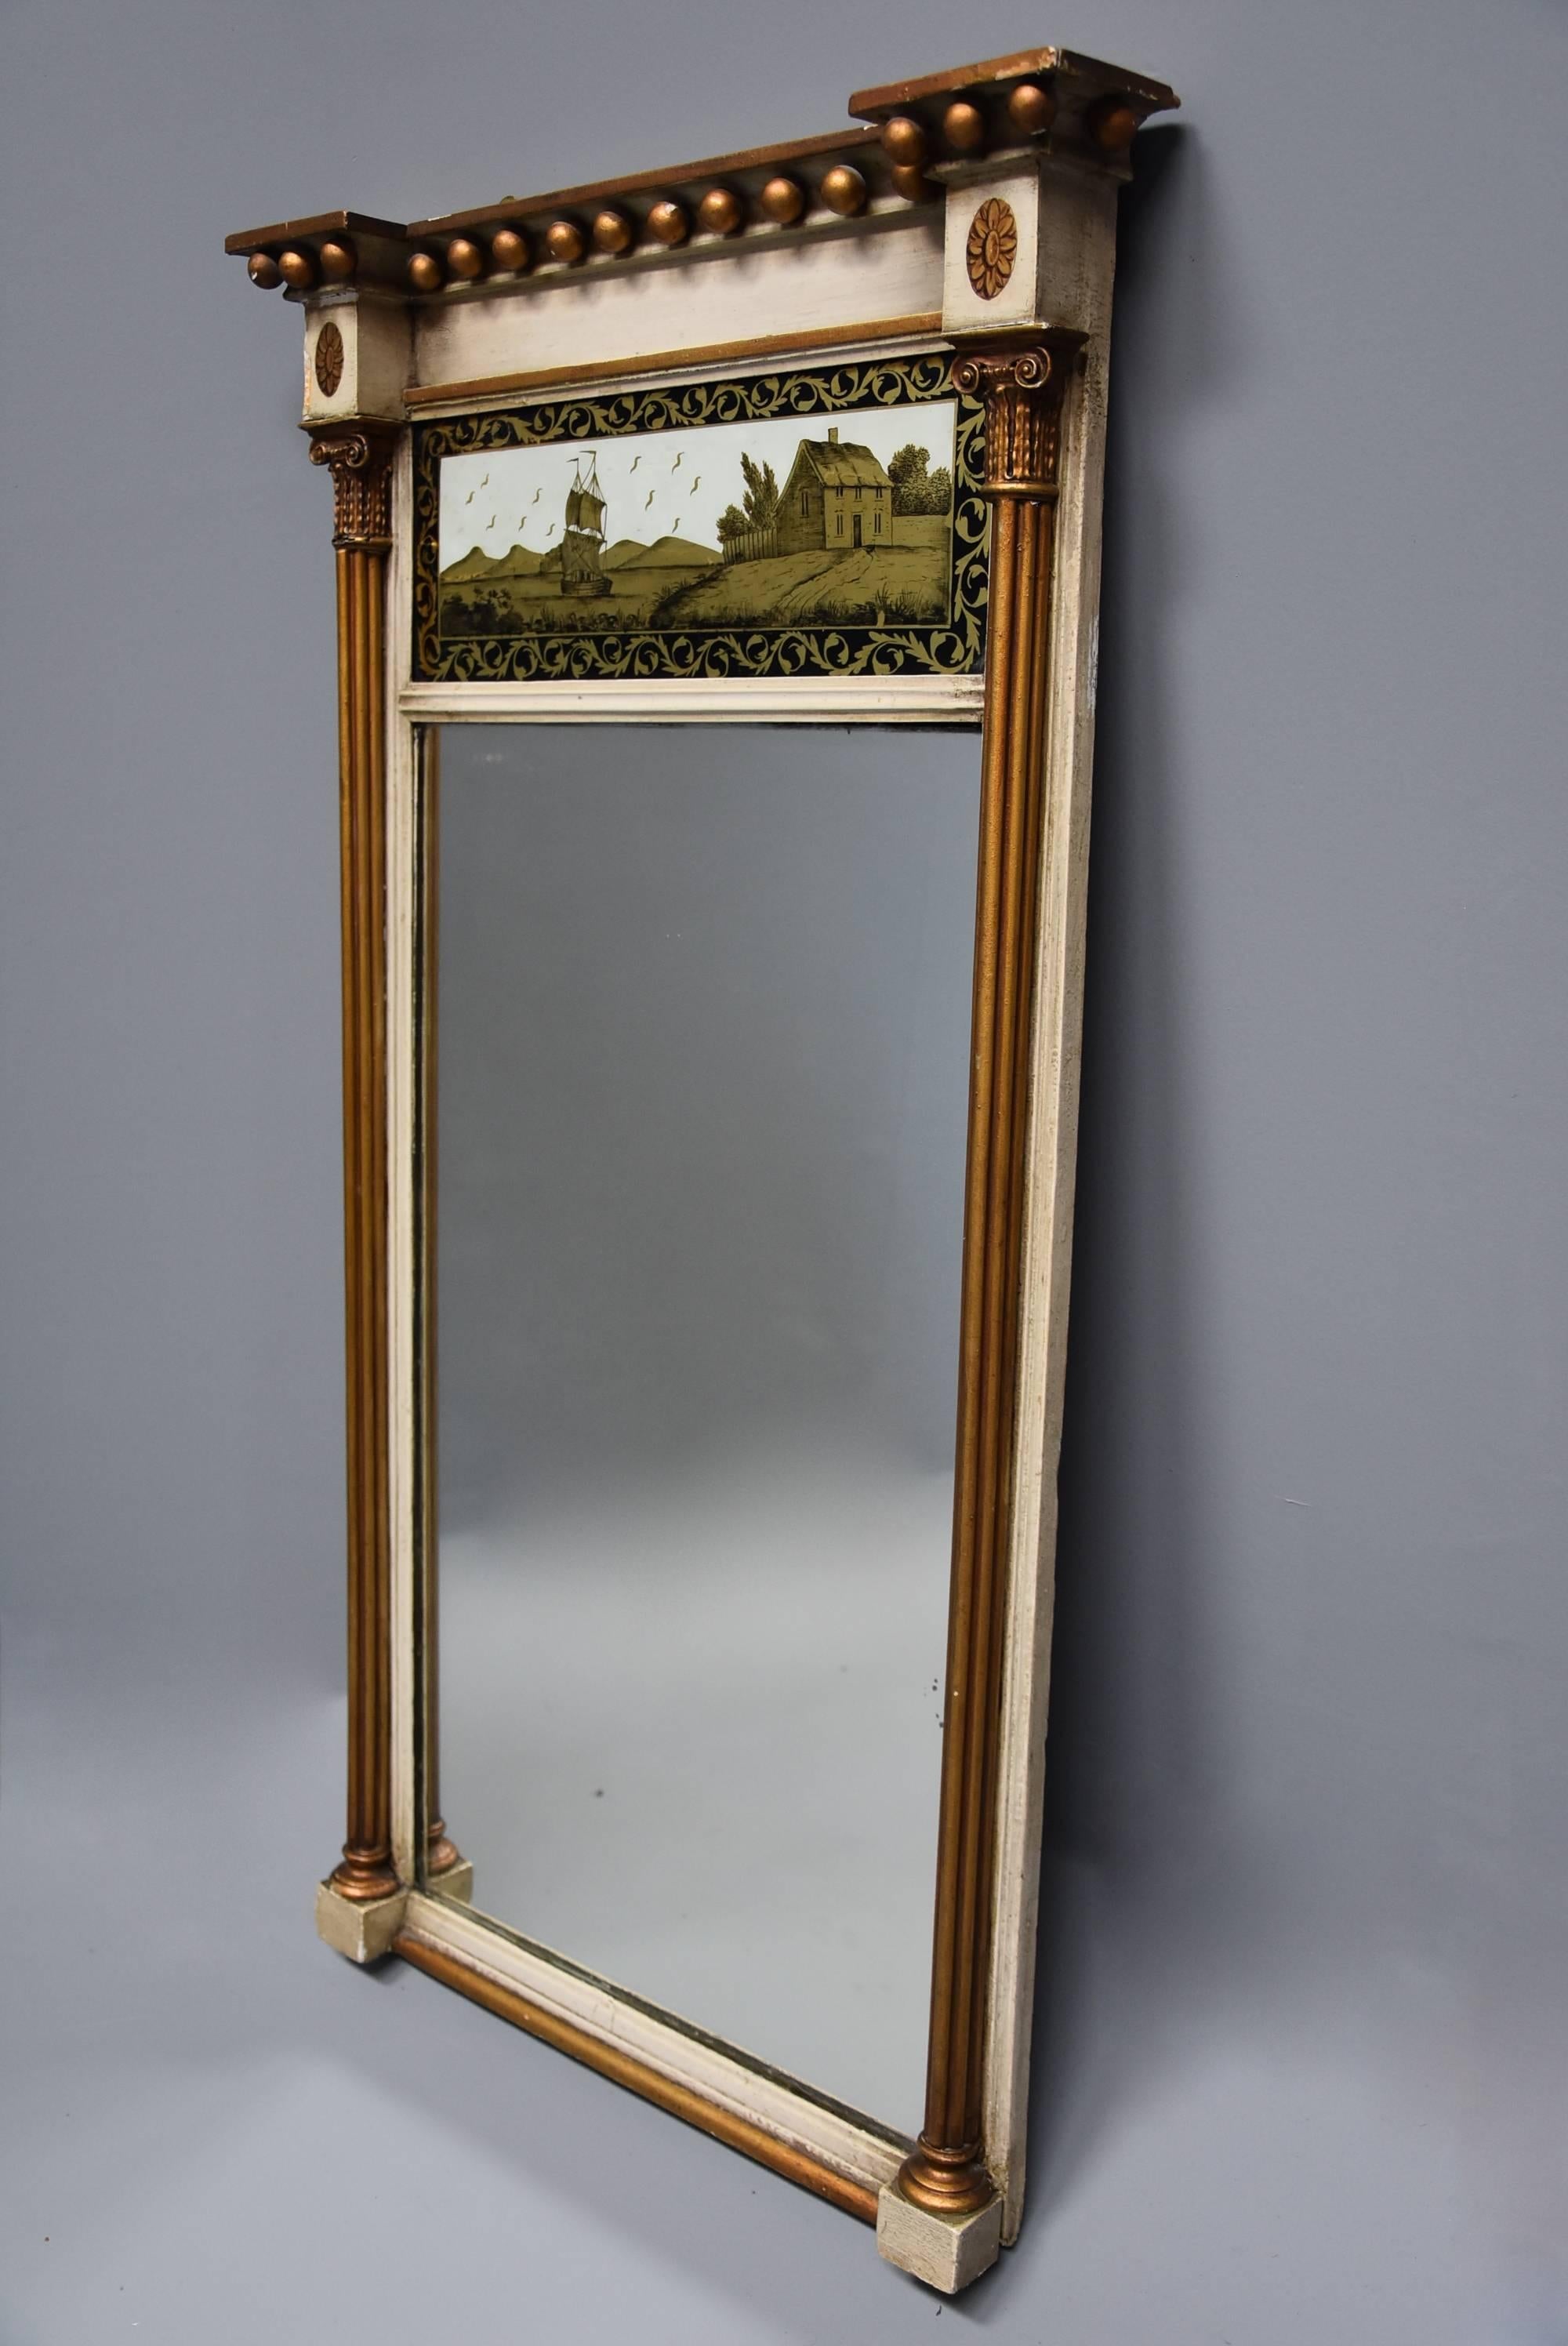 An early 19th century Regency églomisé, gilt and painted pier mirror.

This mirror consists of a ball decoration to the top with oval paterae to either side with a central églomisé painted panel below.

This églomisé panel (reverse painted)